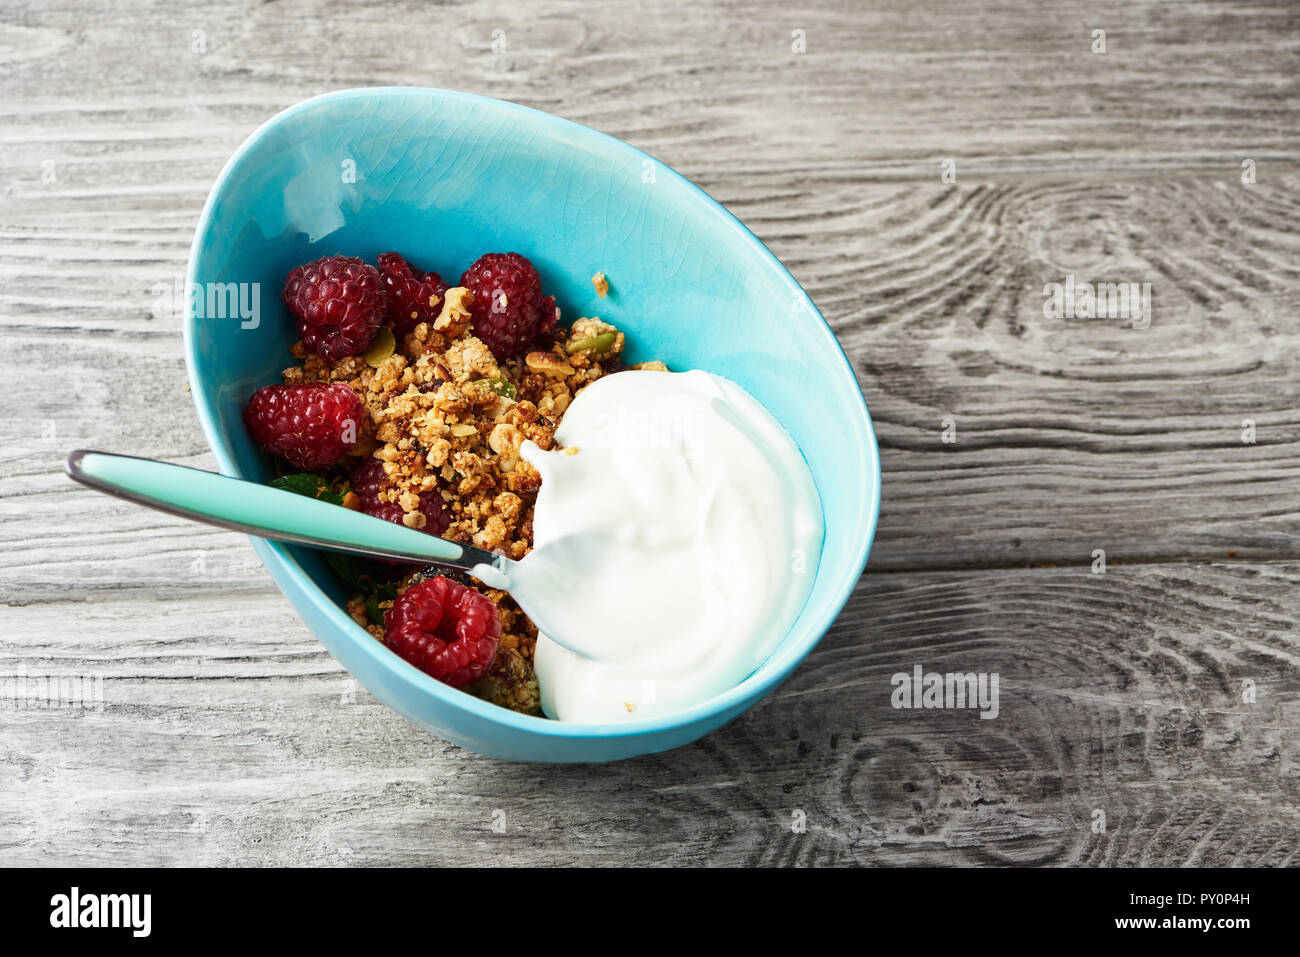 Homemade granola with yogurt in a bowl with raspberries on a wooden table. Stock Photo